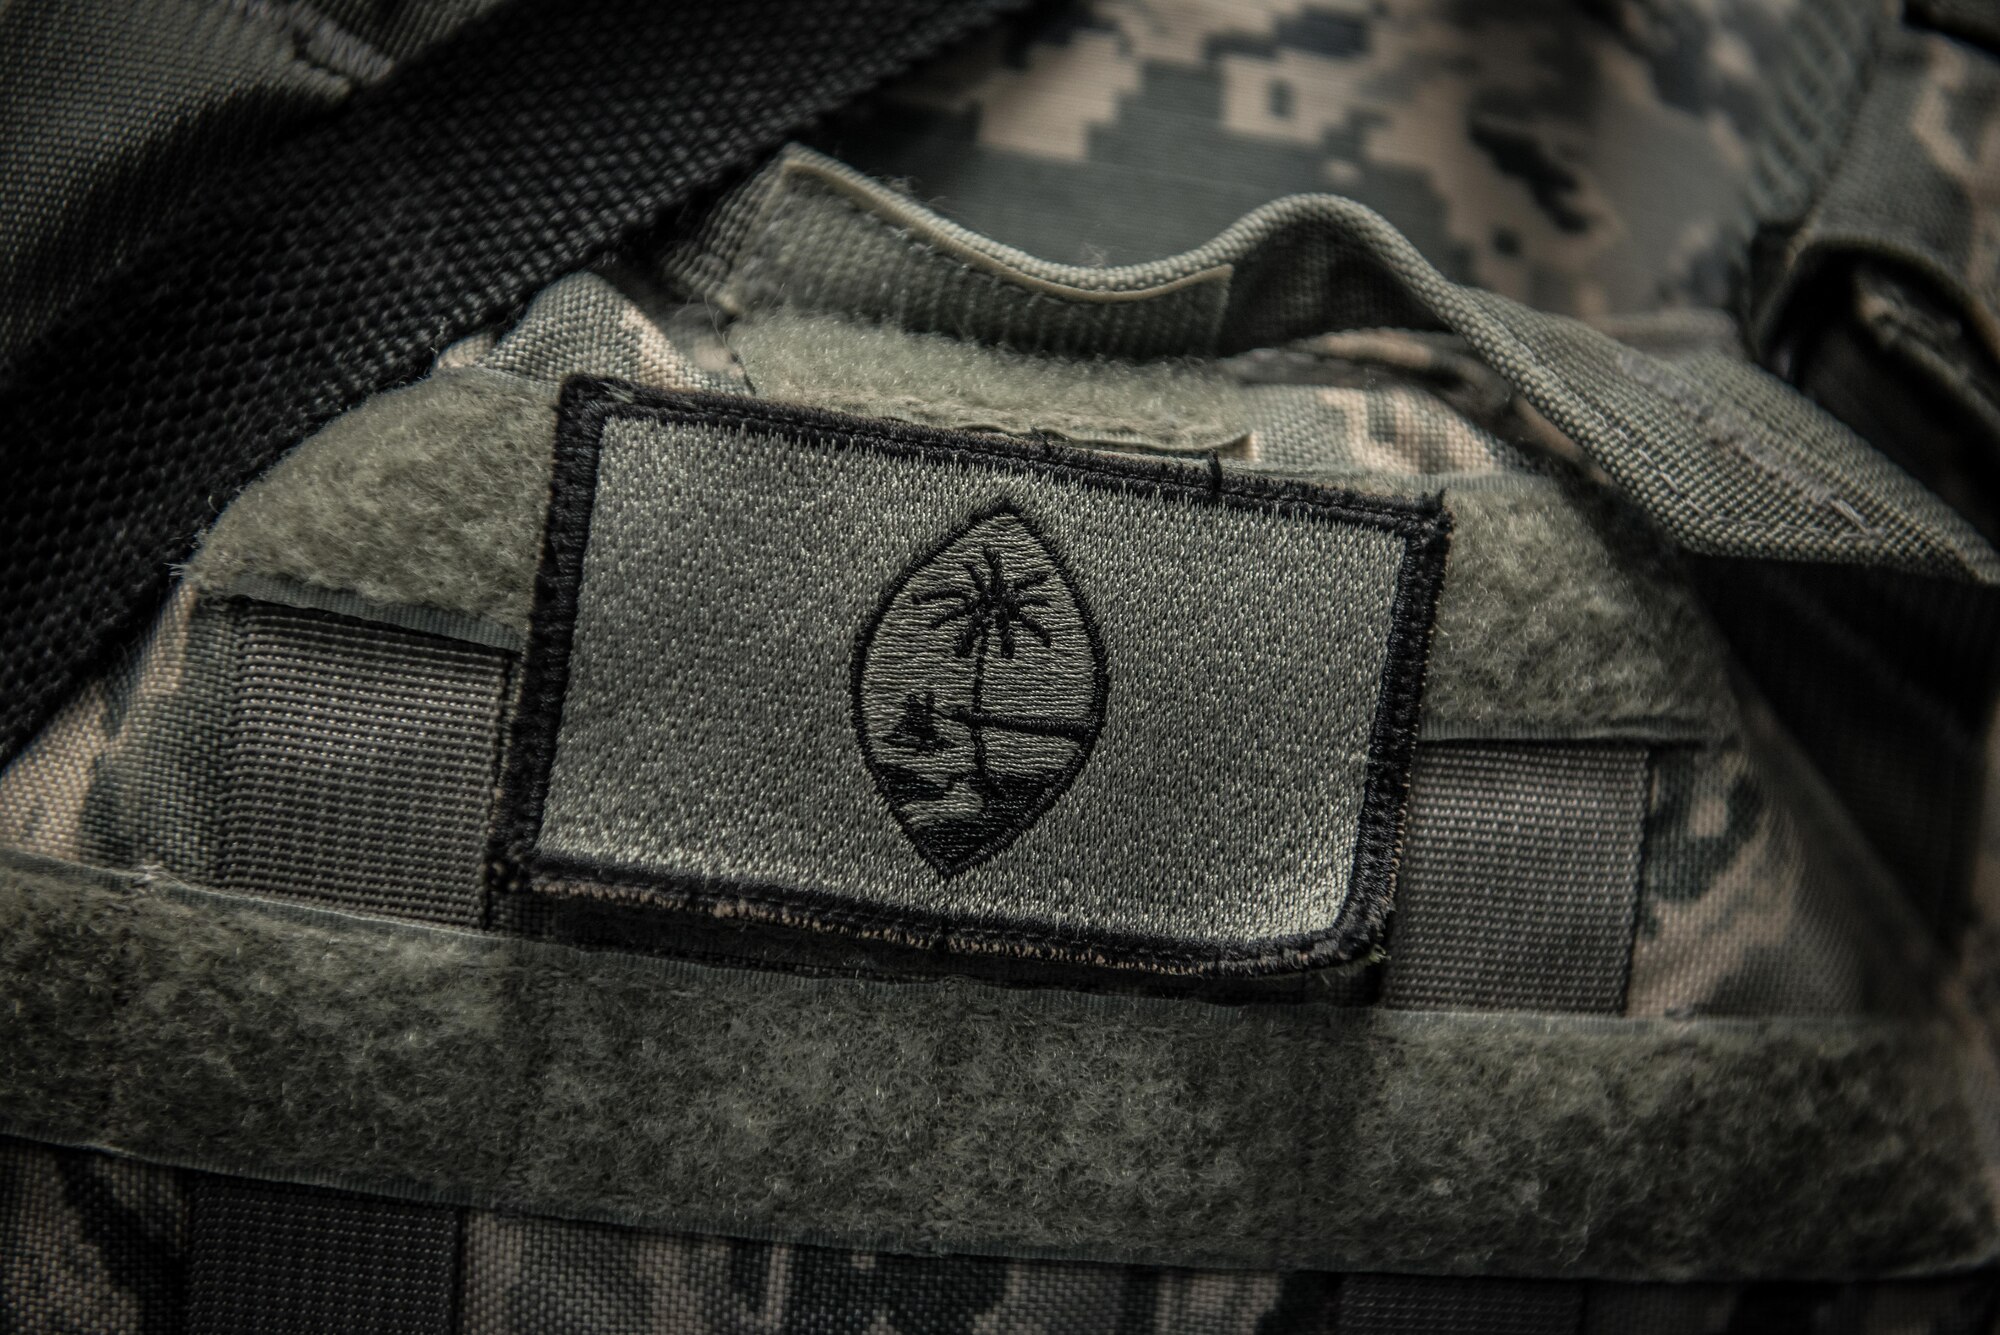 U.S. Air National Guard Tech. Sgt. Casey Morrison, a patrol team lead with the 407th Expeditionary Security forces Squadron, wears a small Guam flag patch on her tactical vest May 13, 2017, in Southwest Asia. Morrison is a traditional guardsman and deployed with a team from the 254th Security Forces Squadron in support of Operation Inherent Resolve. (U.S. Air Force photo by Staff Sgt. Alexander W. Riedel)